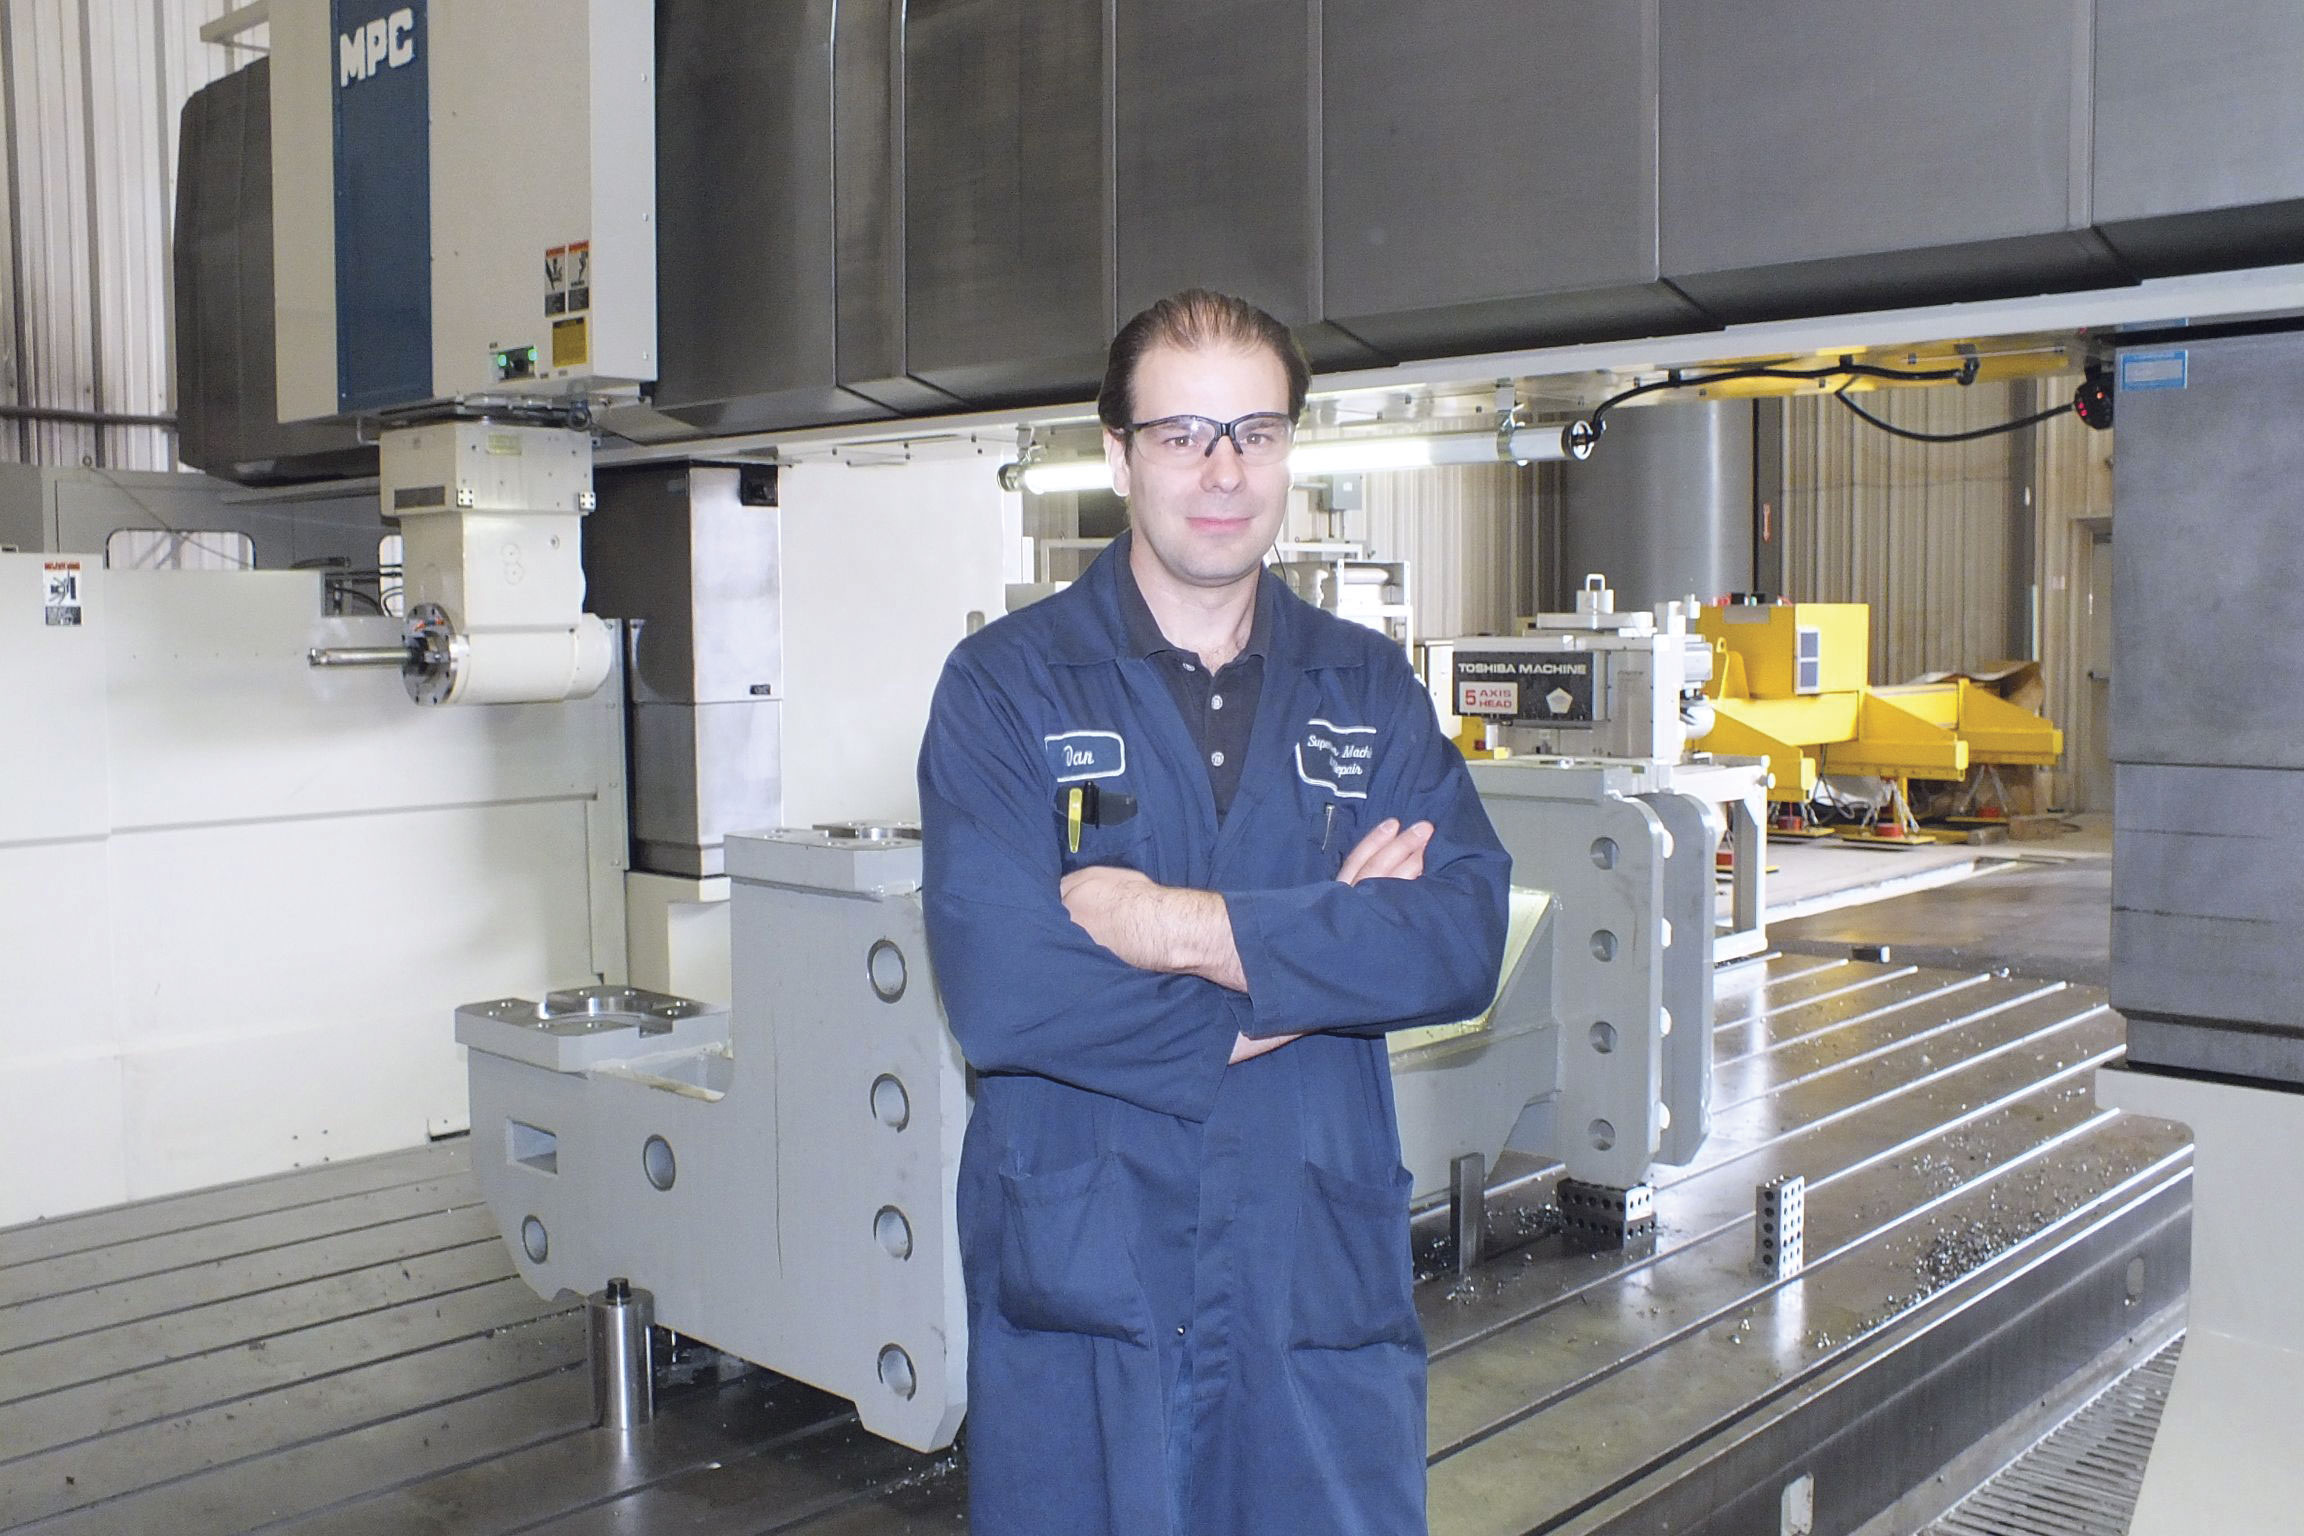 Dan Boaretto believes in taking calculated risks if you want to grow a machine shop business; hence the purchase of the large Toshiba machine, seen behind him.